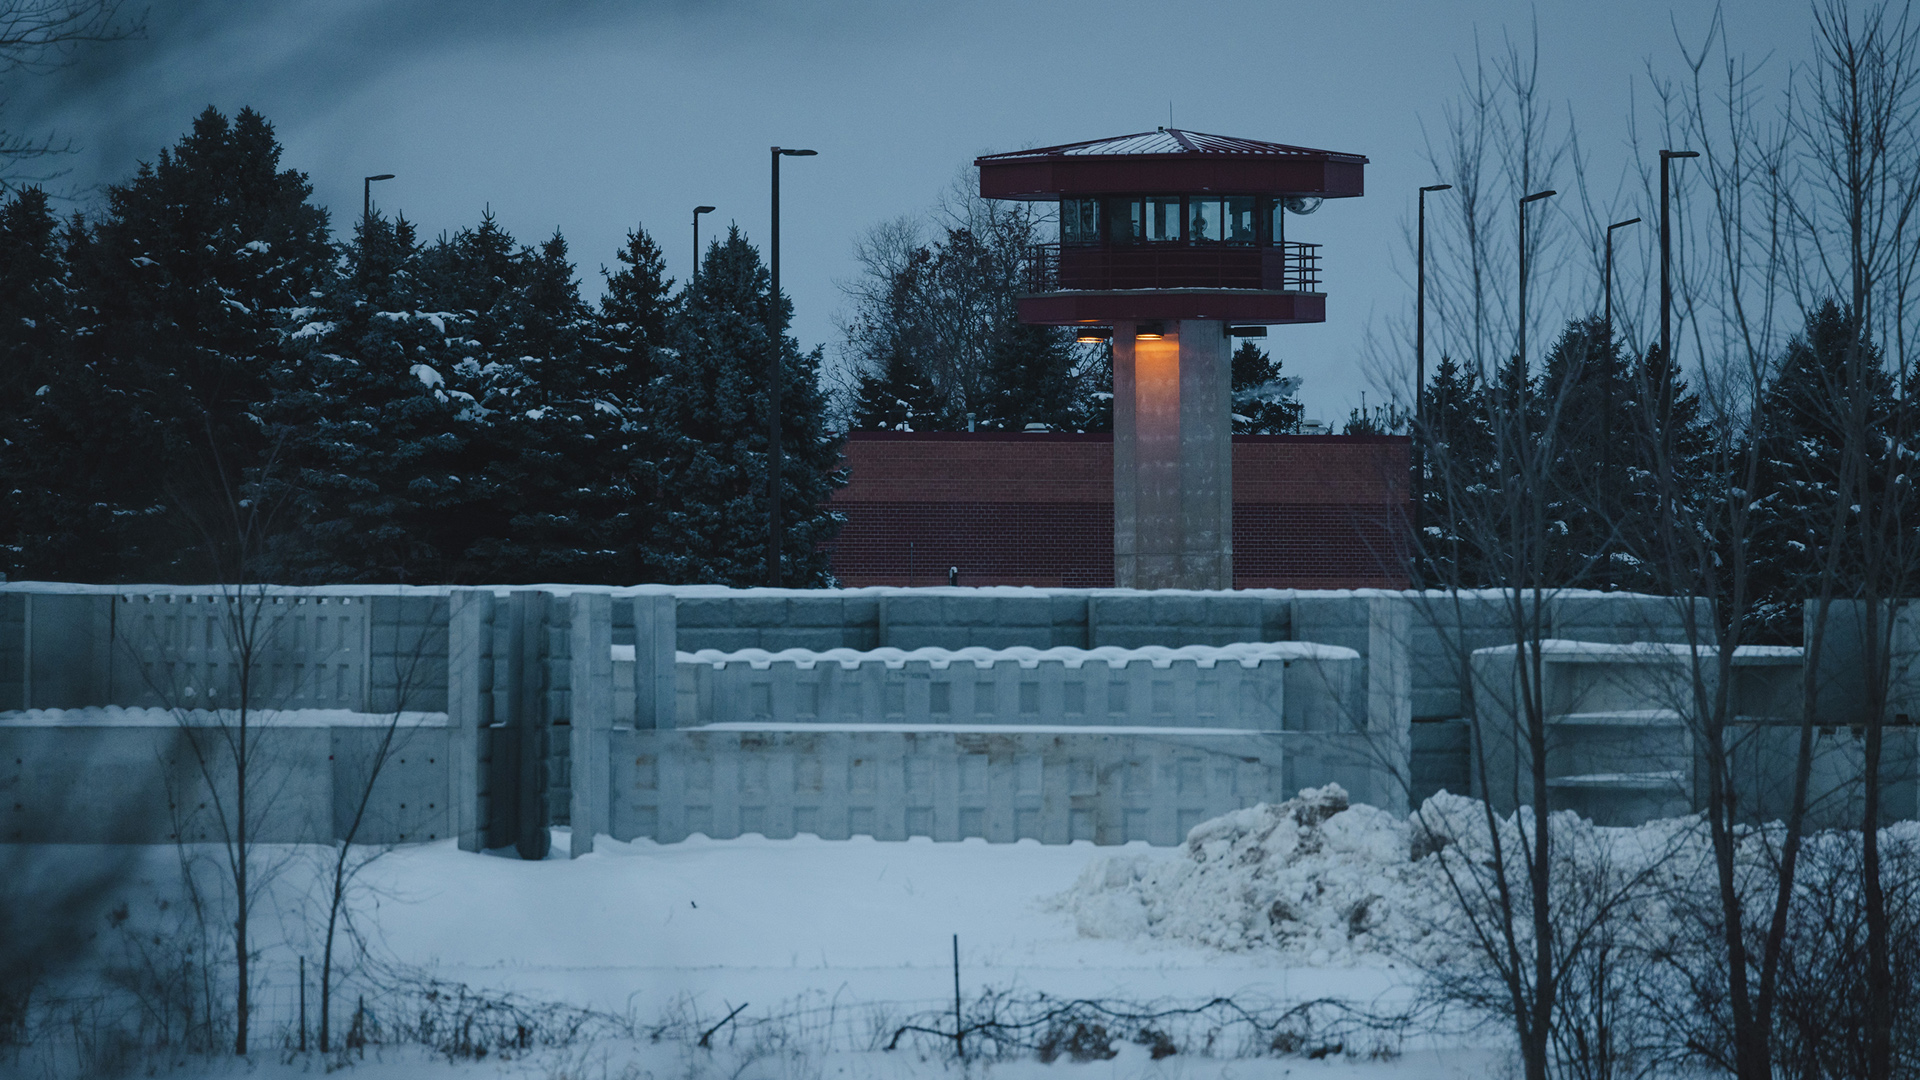 A prison guard tower build of concrete blocks and a metal observation post at top with windows on all sides stands above concrete walls and among light poles, with a snow covered field and leafless deciduous trees in the foreground, and snow-covered coniferous trees in the background.